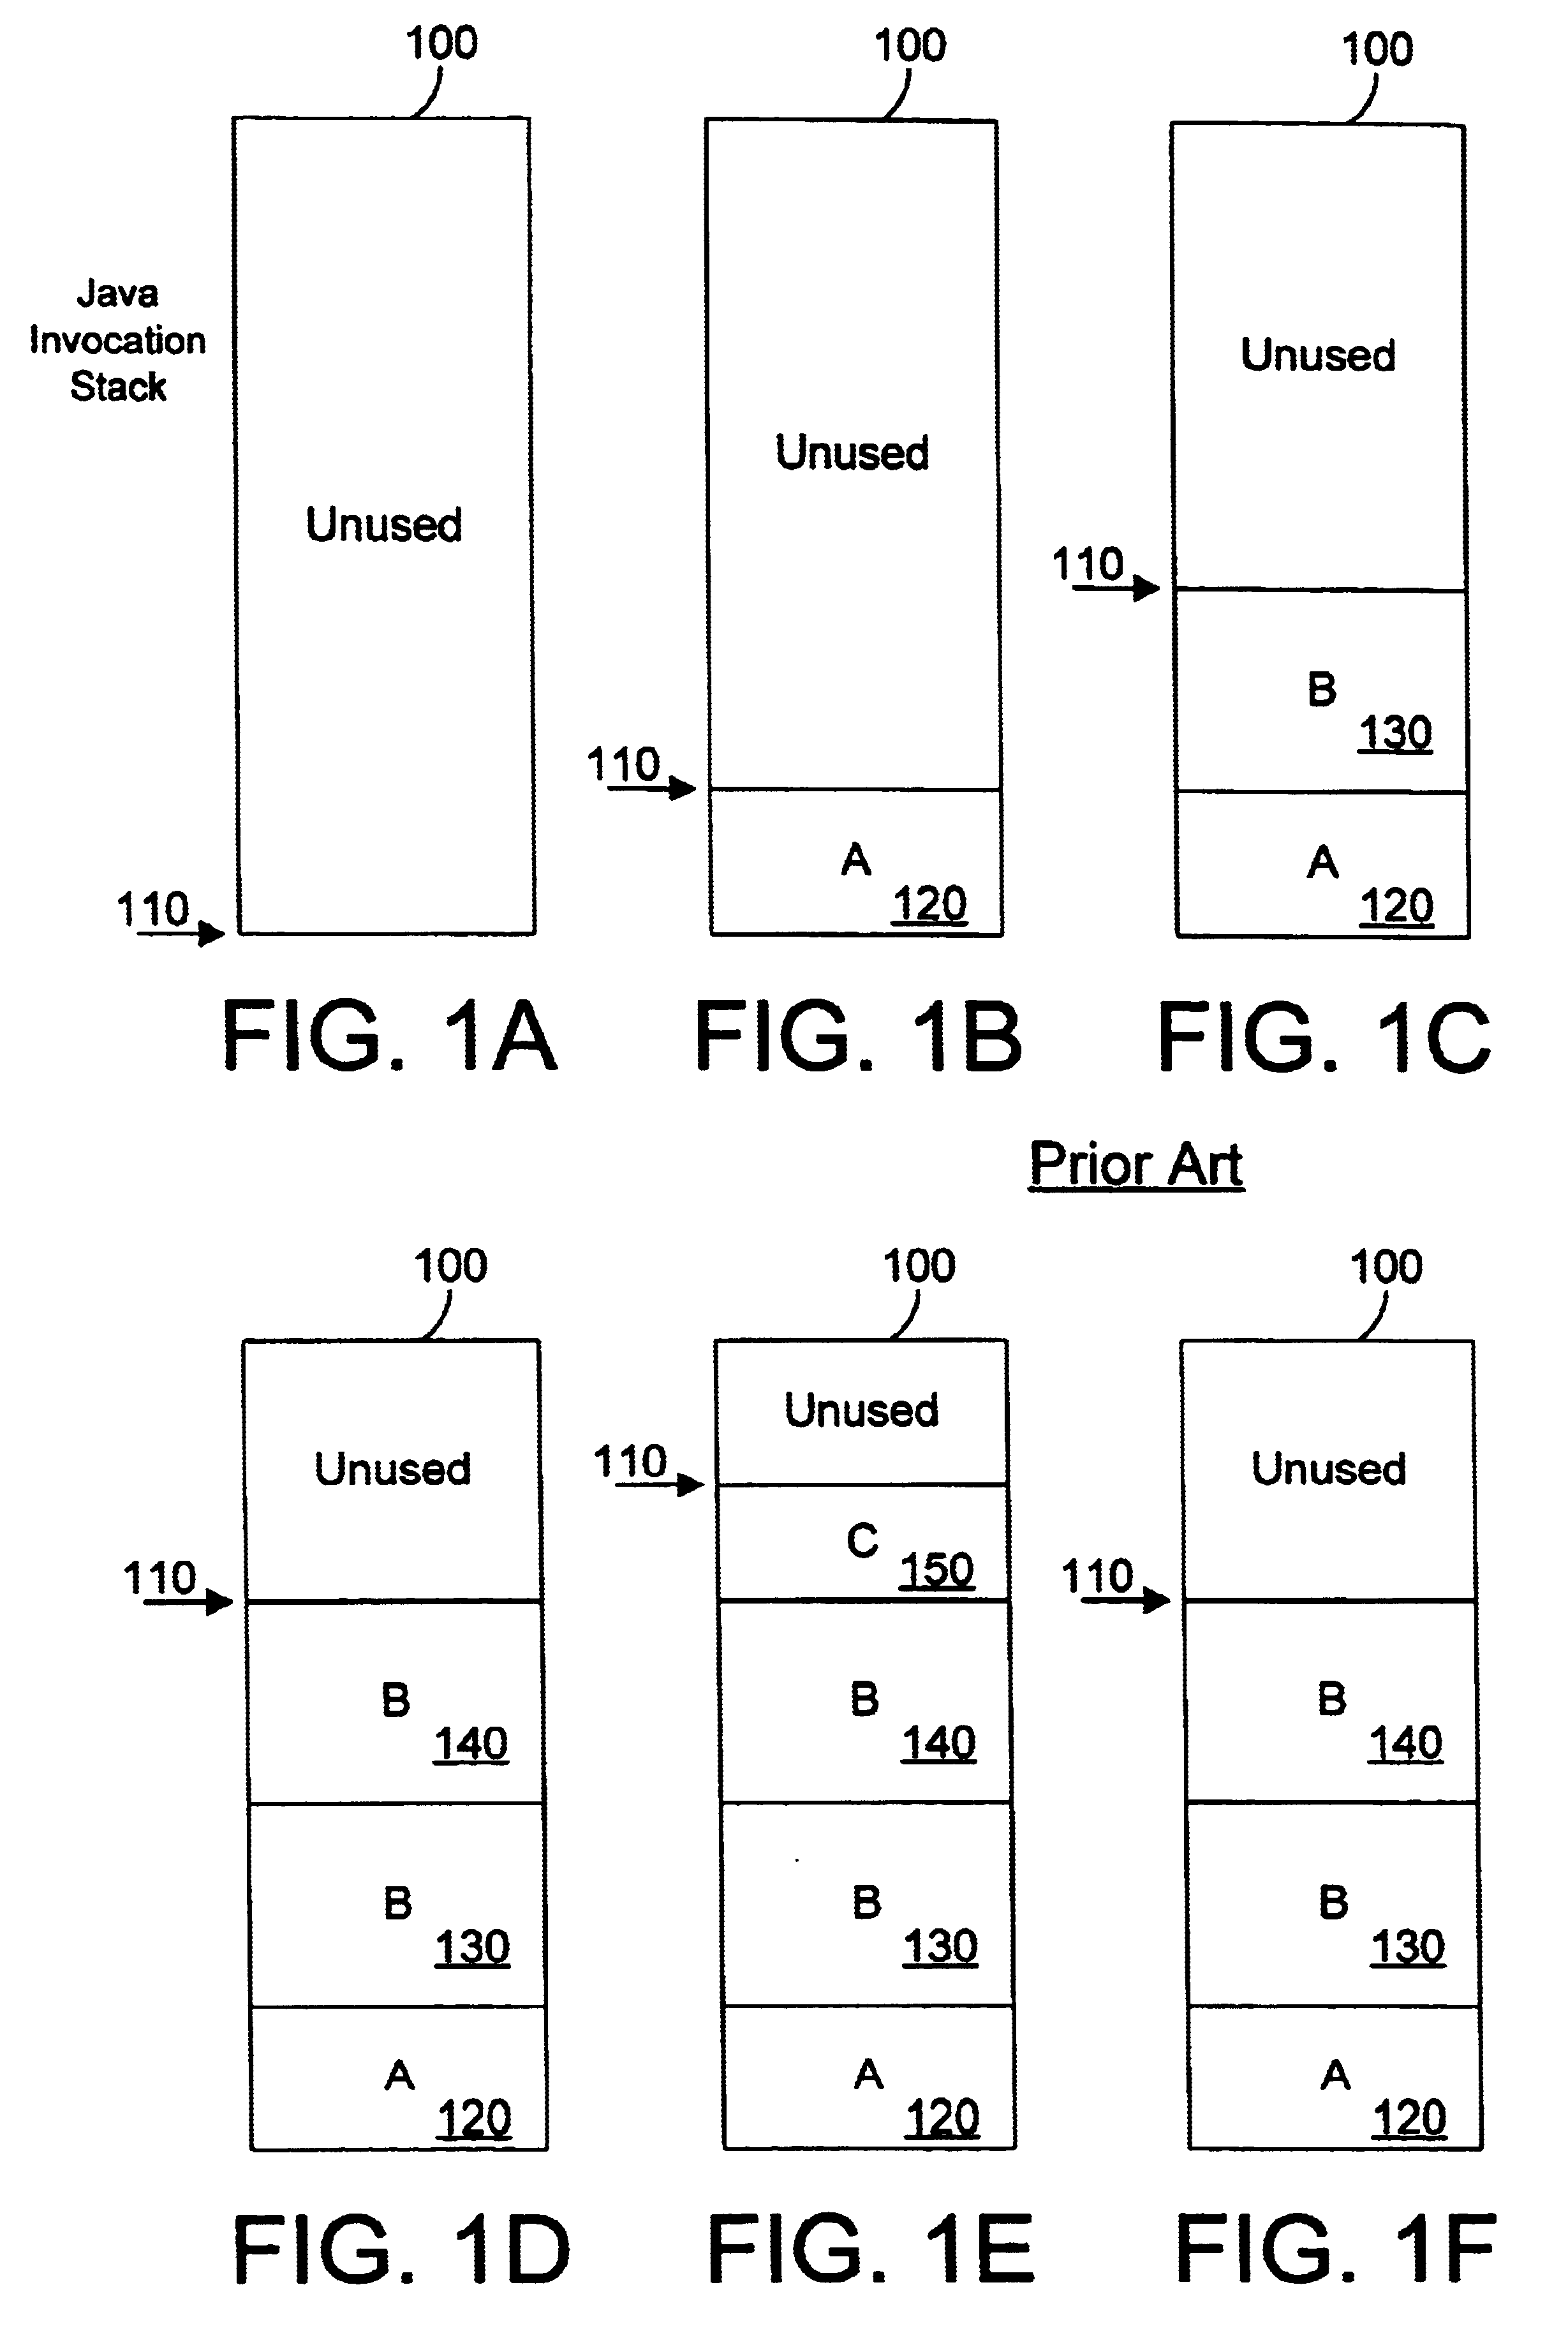 Object oriented apparatus and method for allocating array objects on an invocation stack